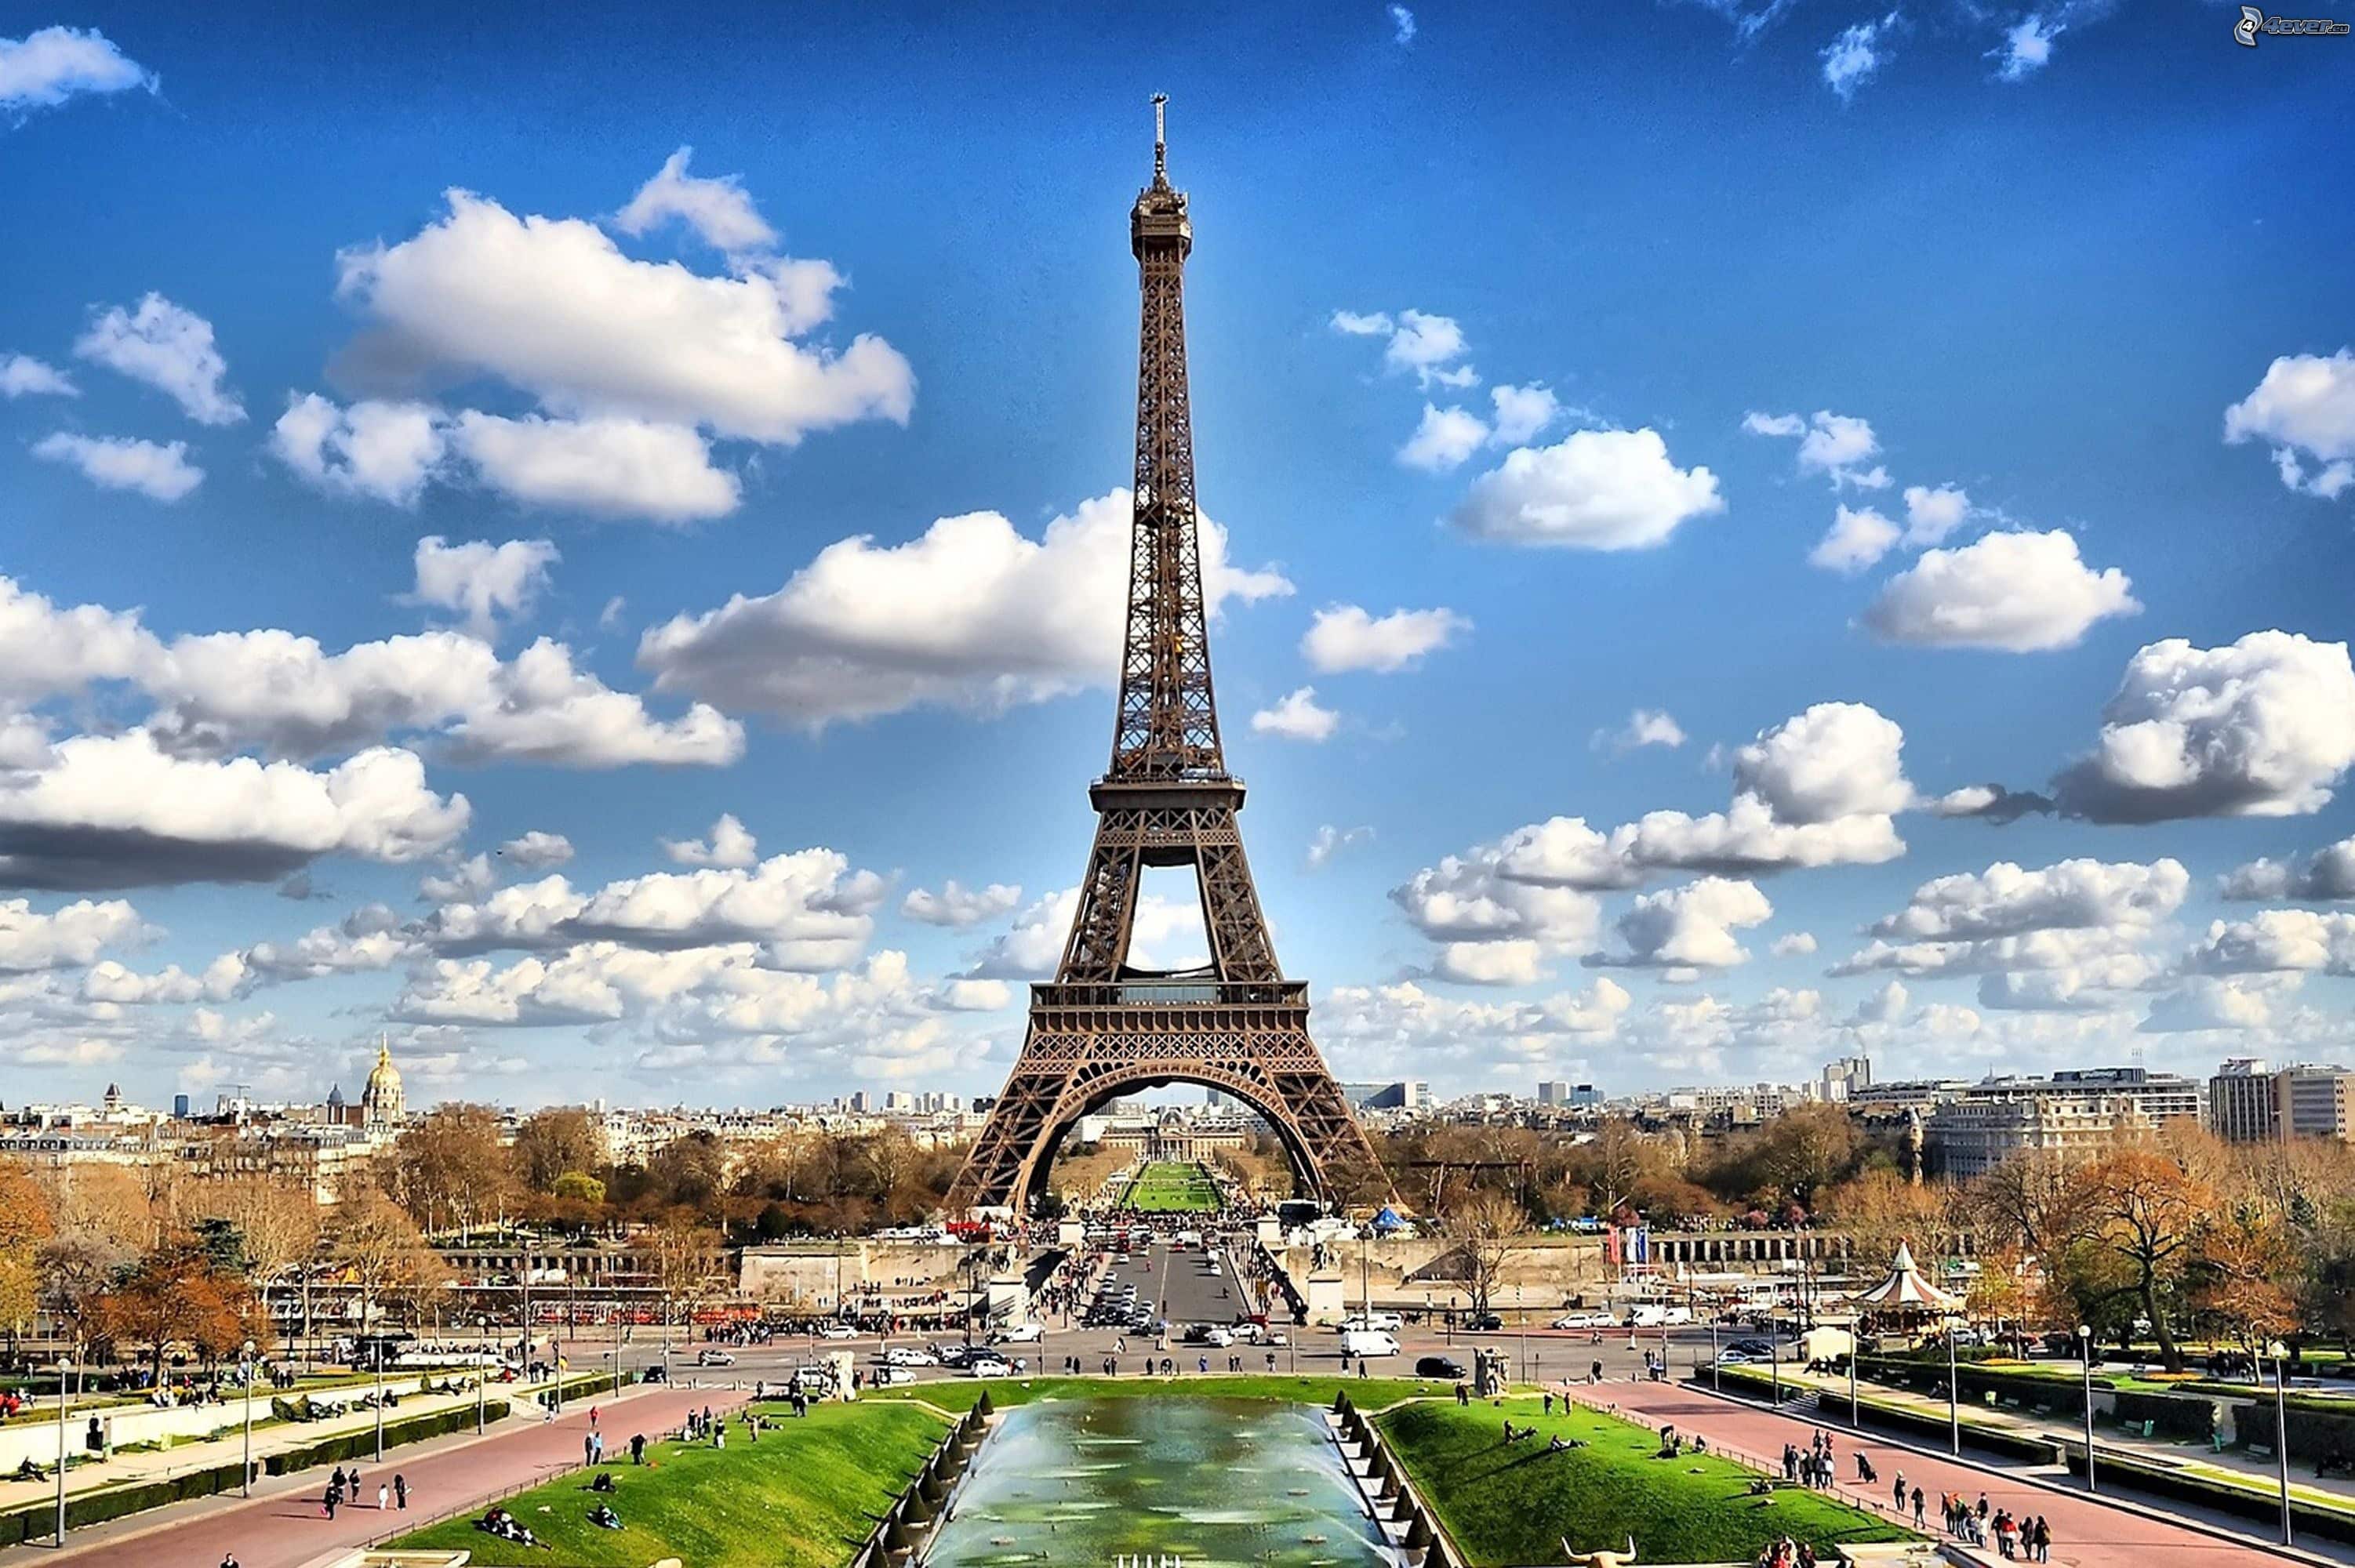 French slang words & phrases: 121 Colloquialisms from Paris (France) -  Snippets of Paris